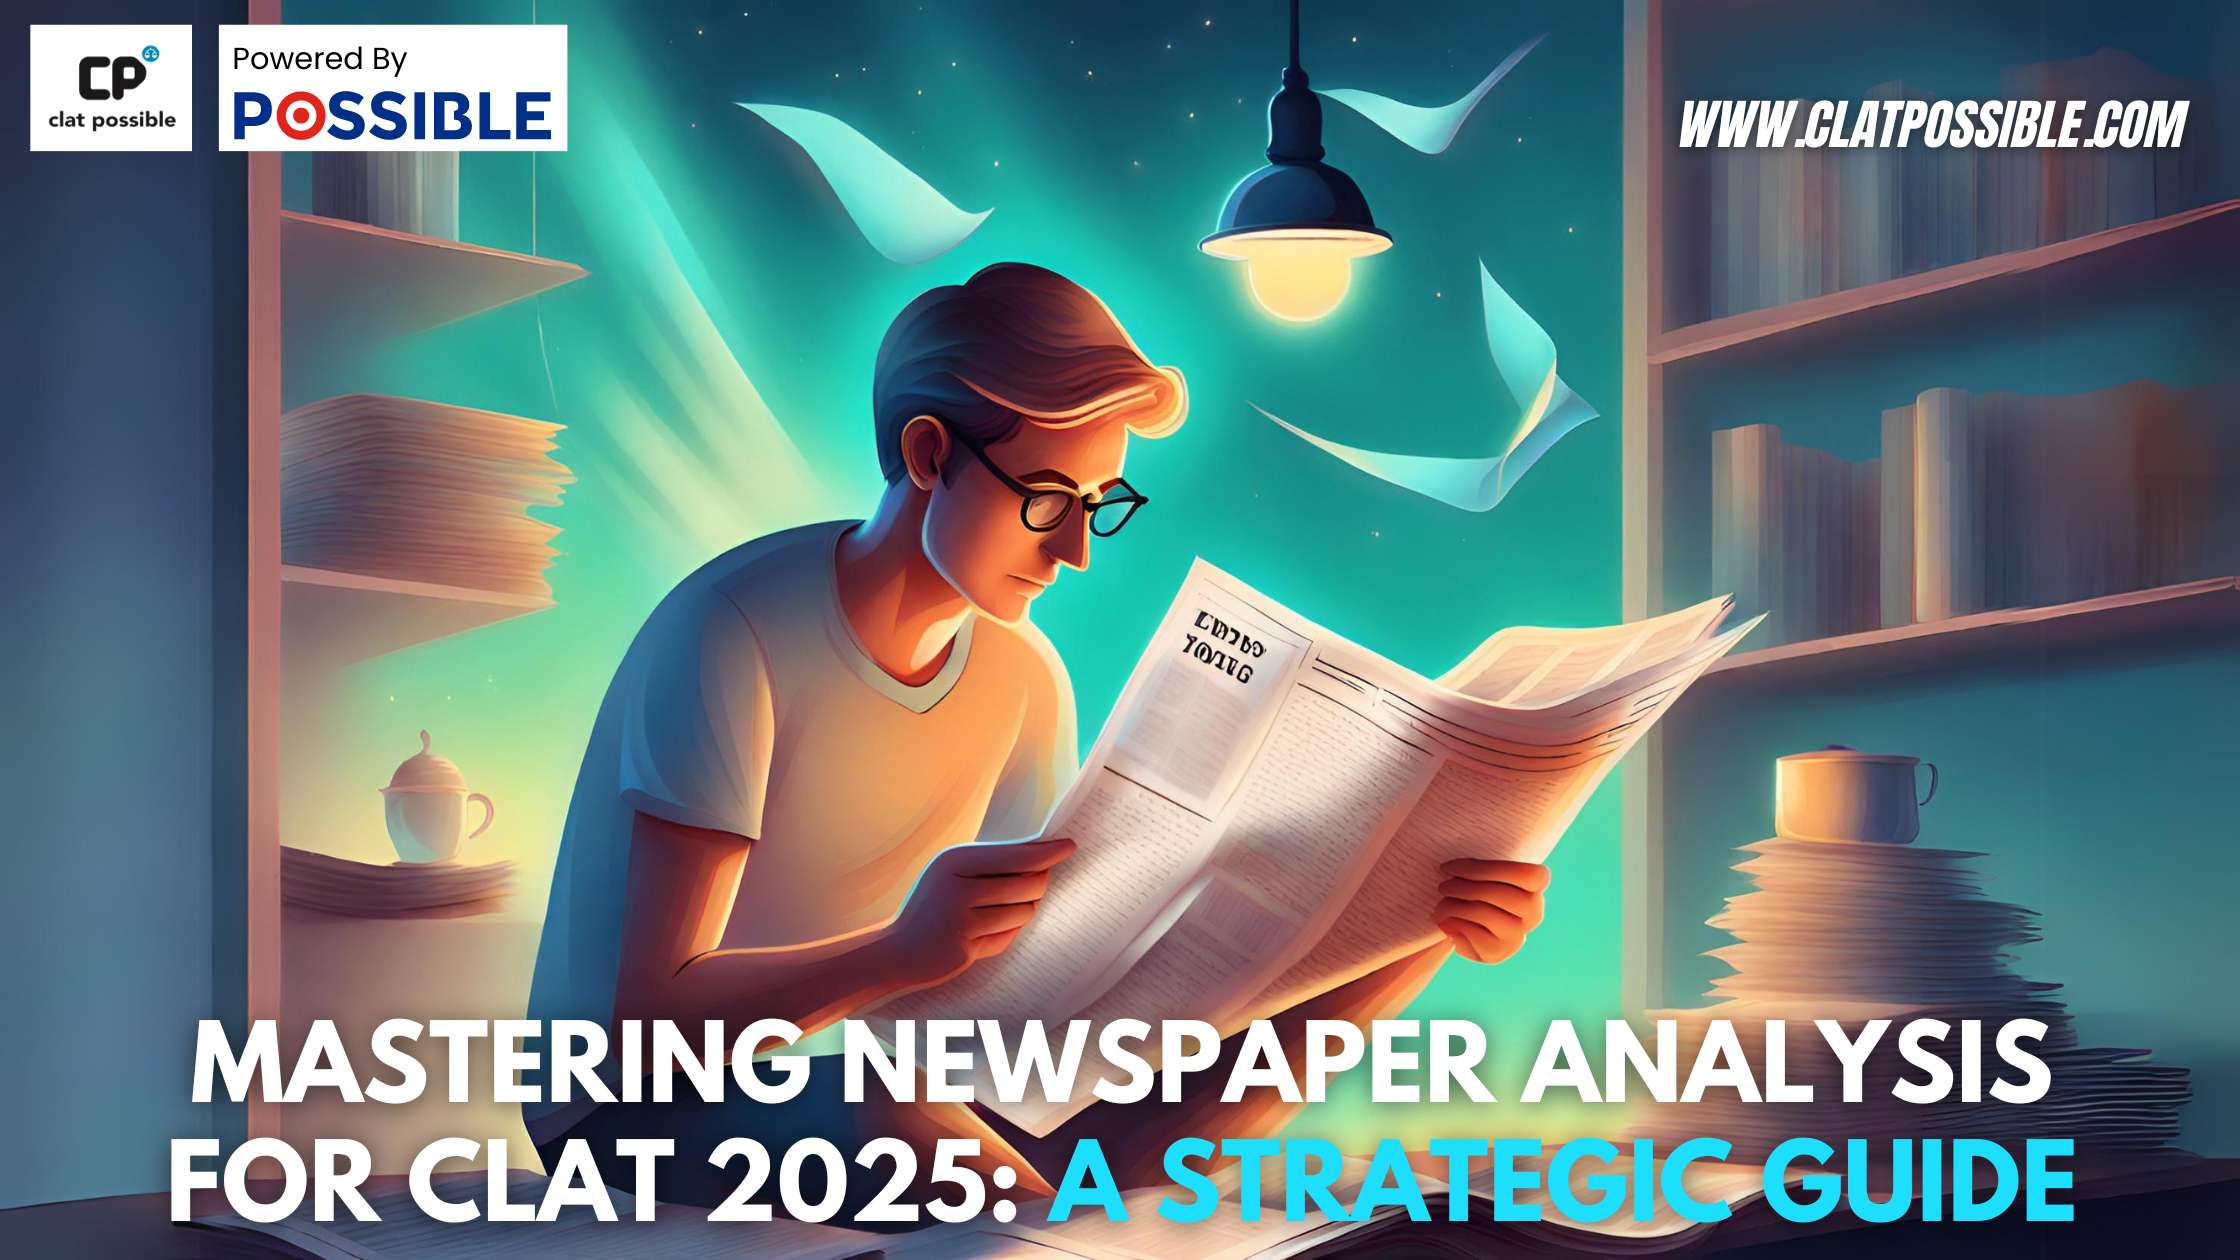 Newspaper Analysis for CLAT 2025